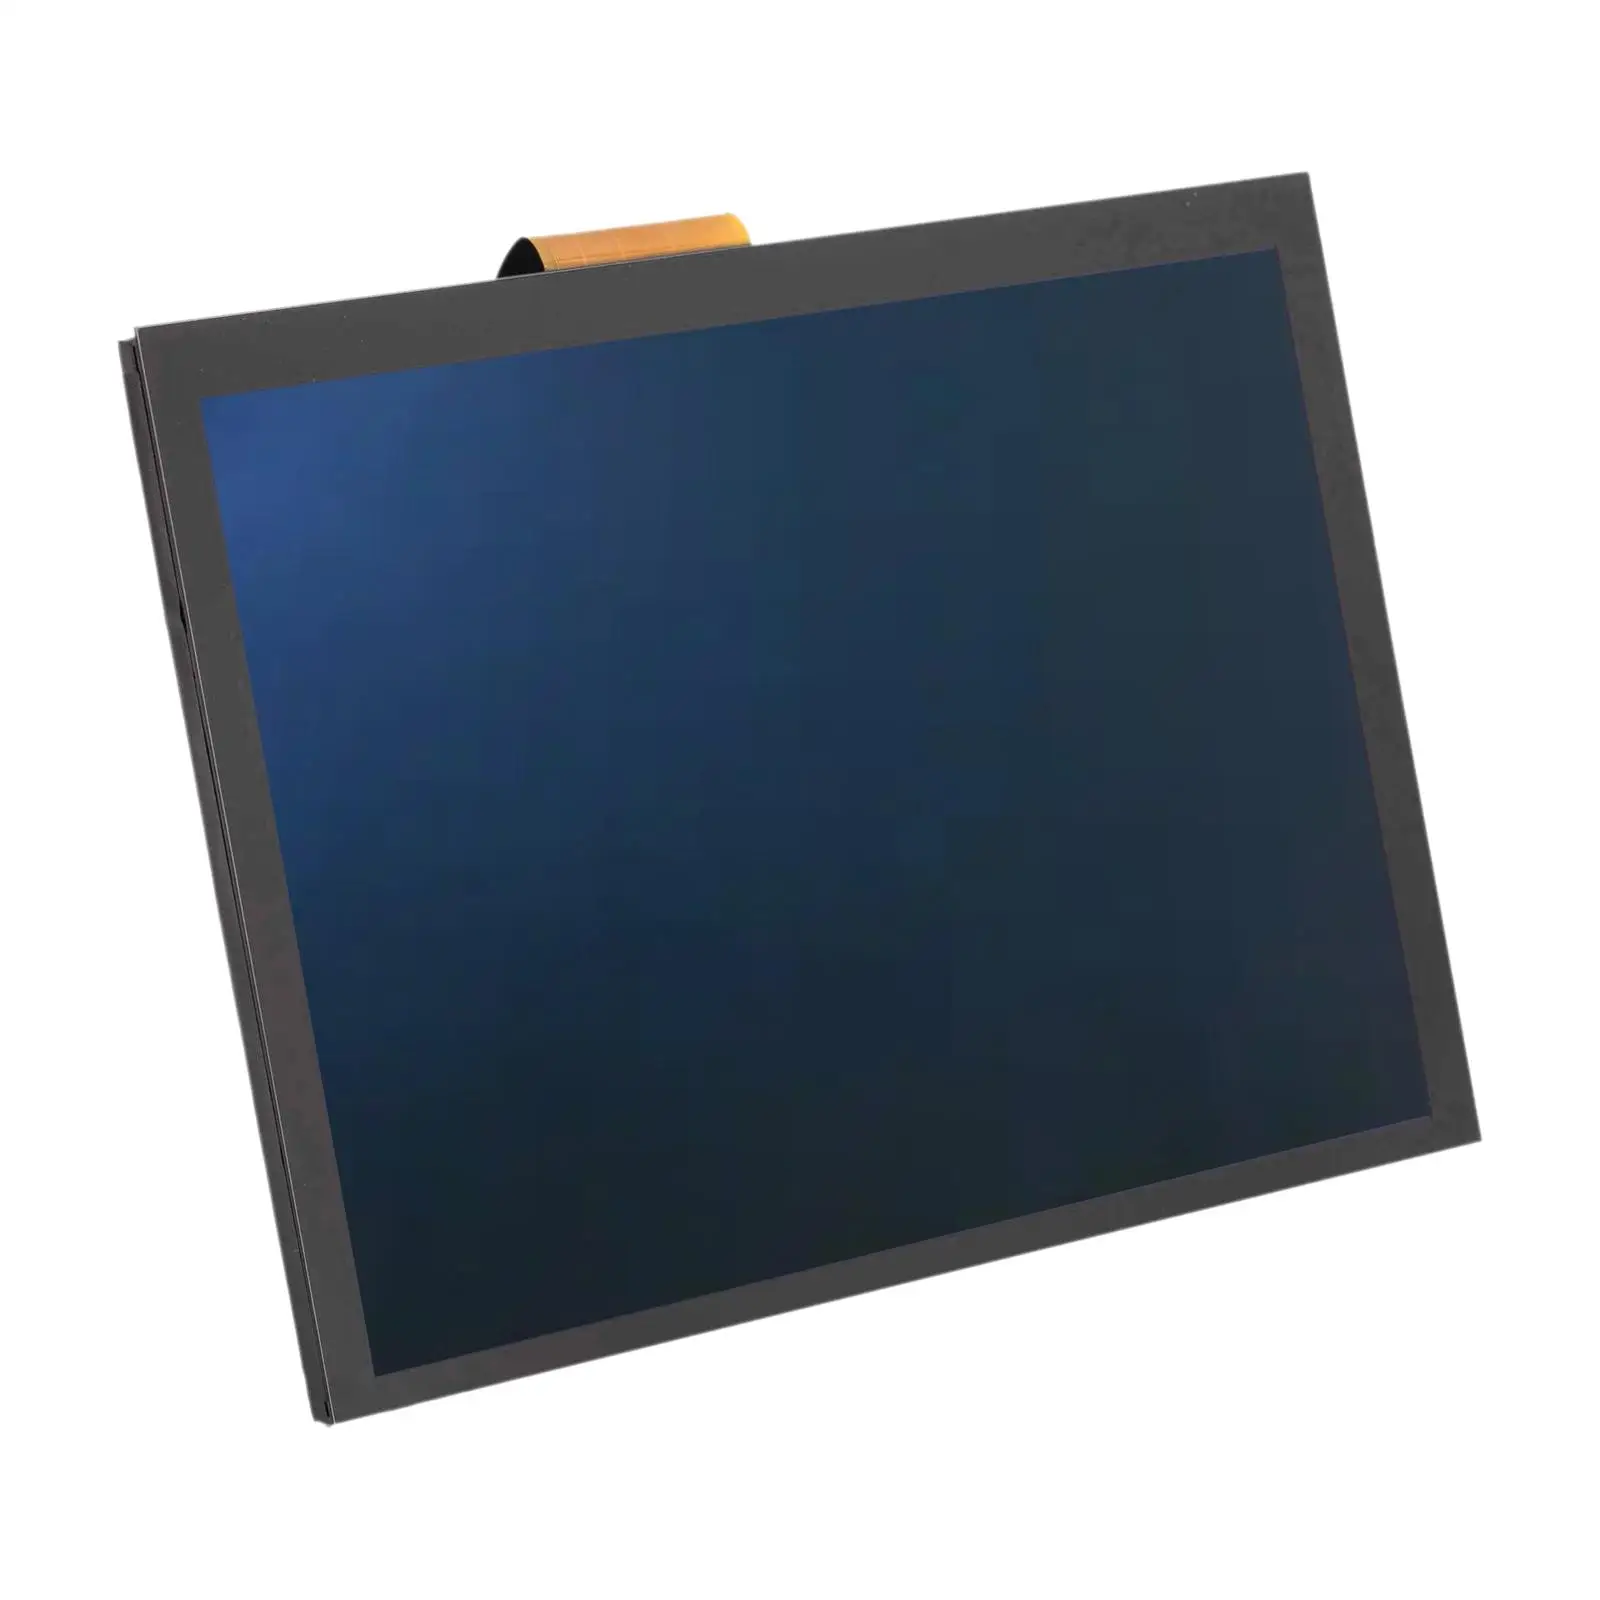 8.4inch Touch Screen LA084x01 Automotive Assembly LCD Monitor for Dodge